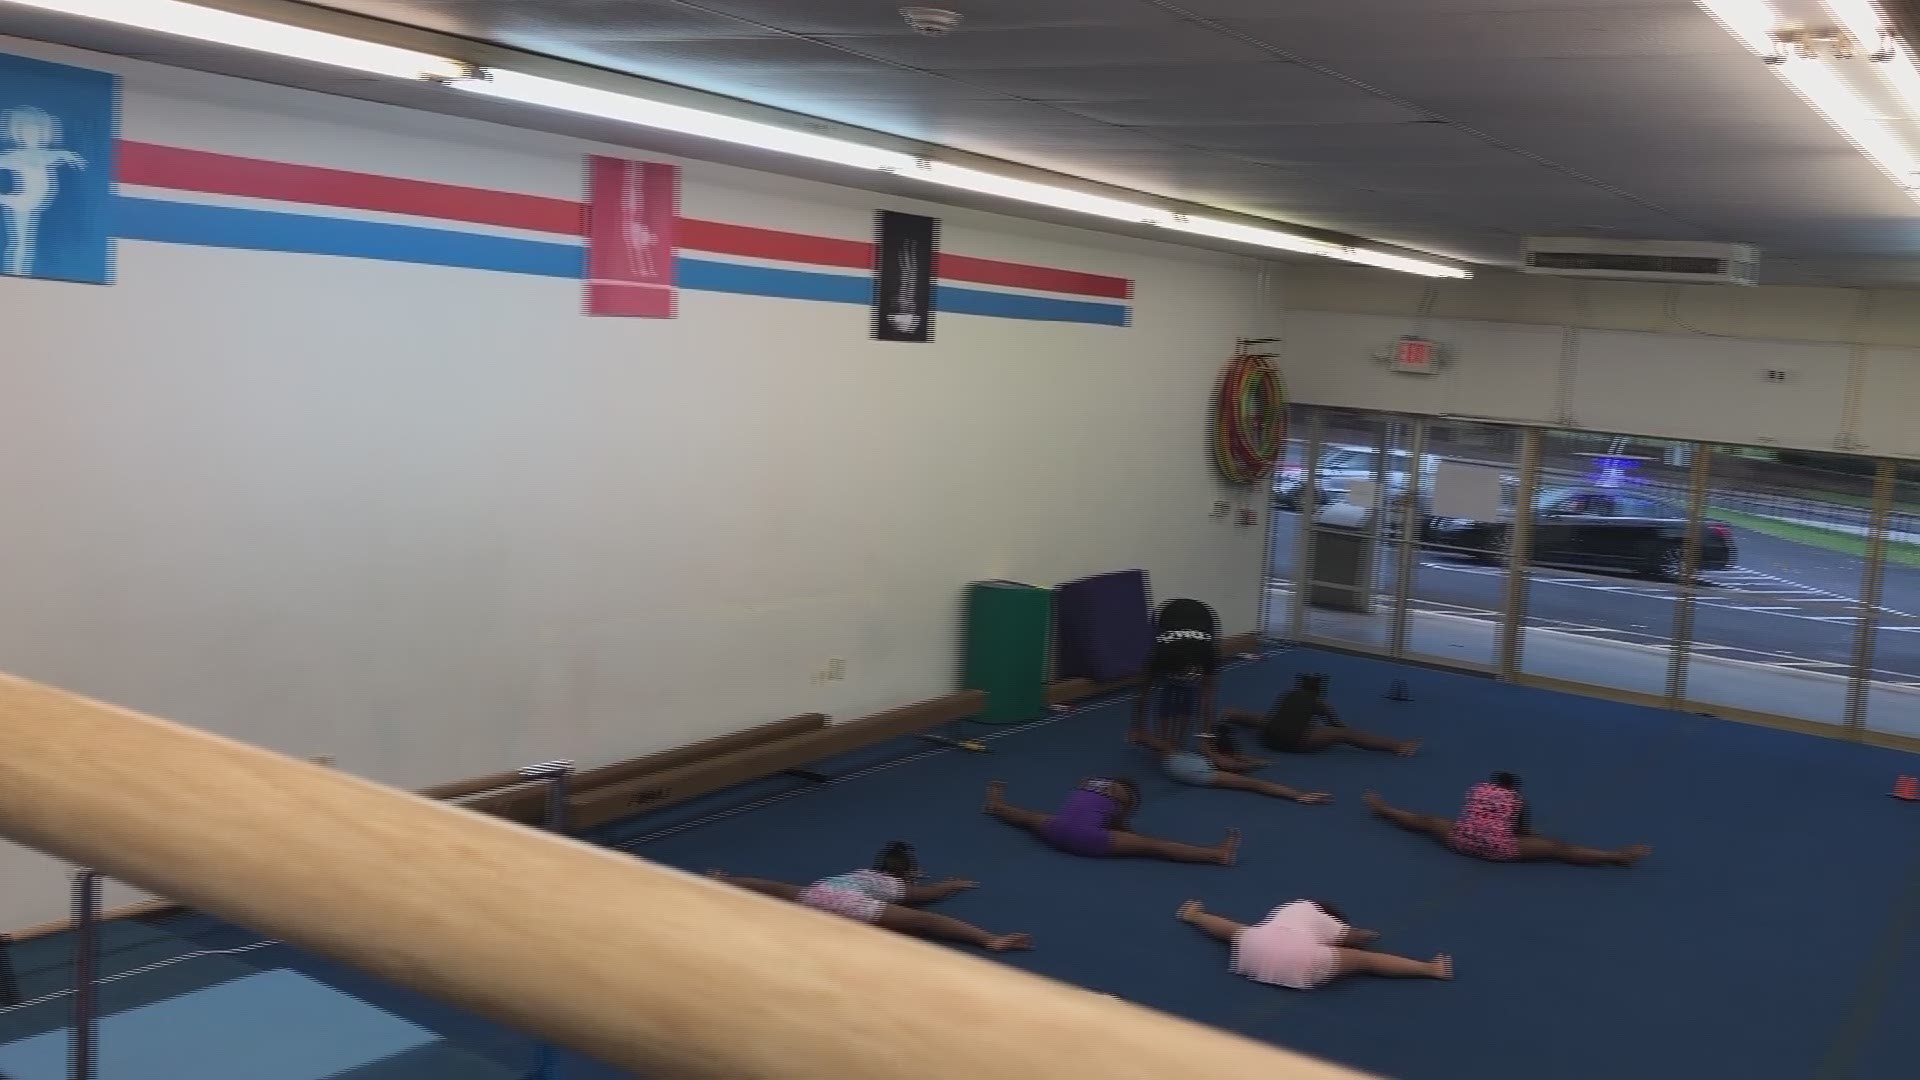 College Park gymnastics studio implements new rules for the ‘new normal’